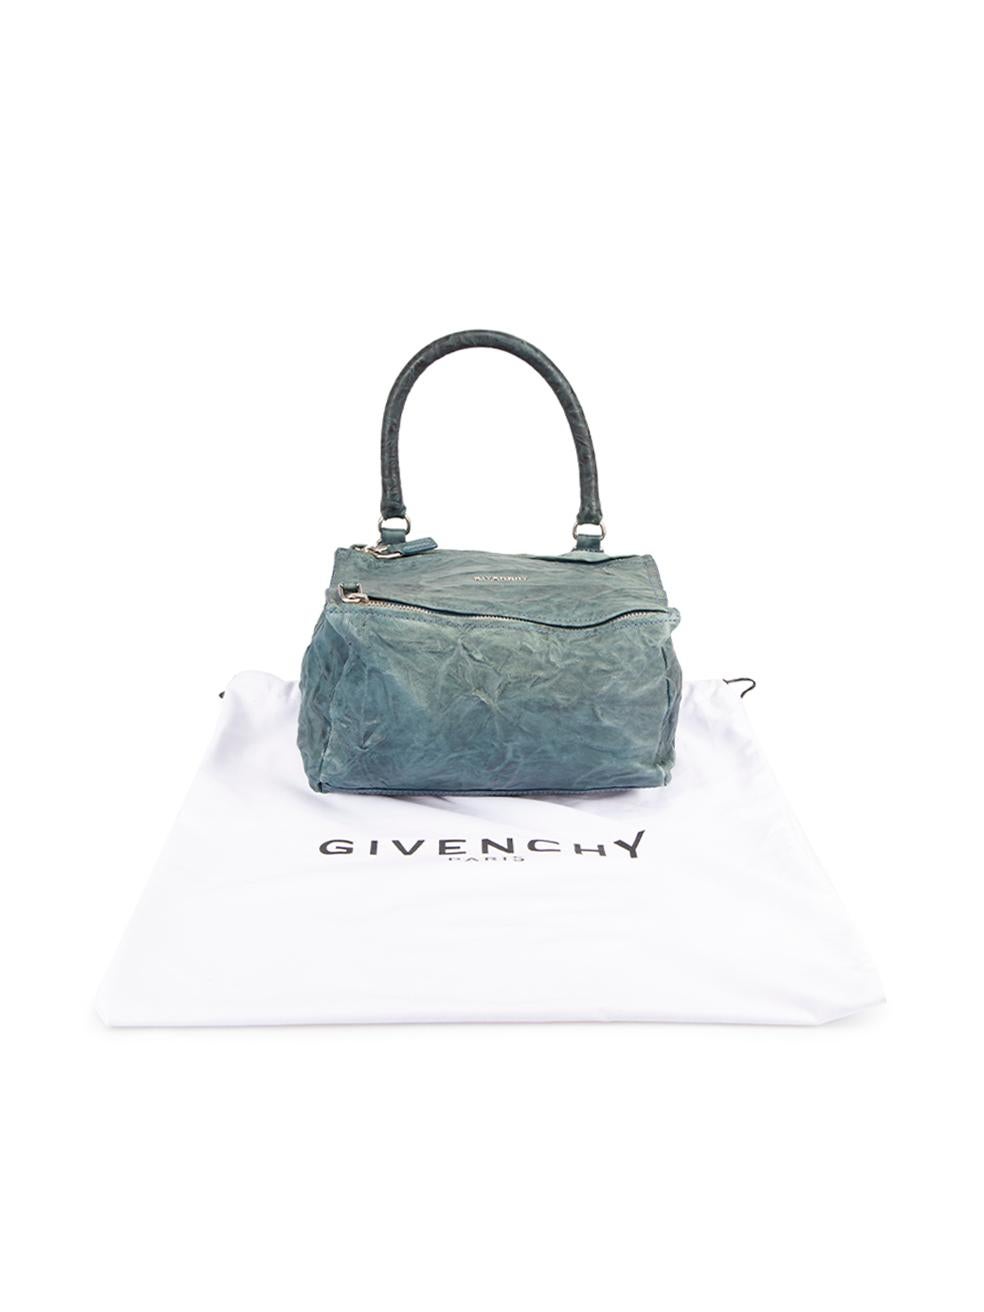 Givenchy Women's Green Distressed Leather Pandora Messenger Bag 5